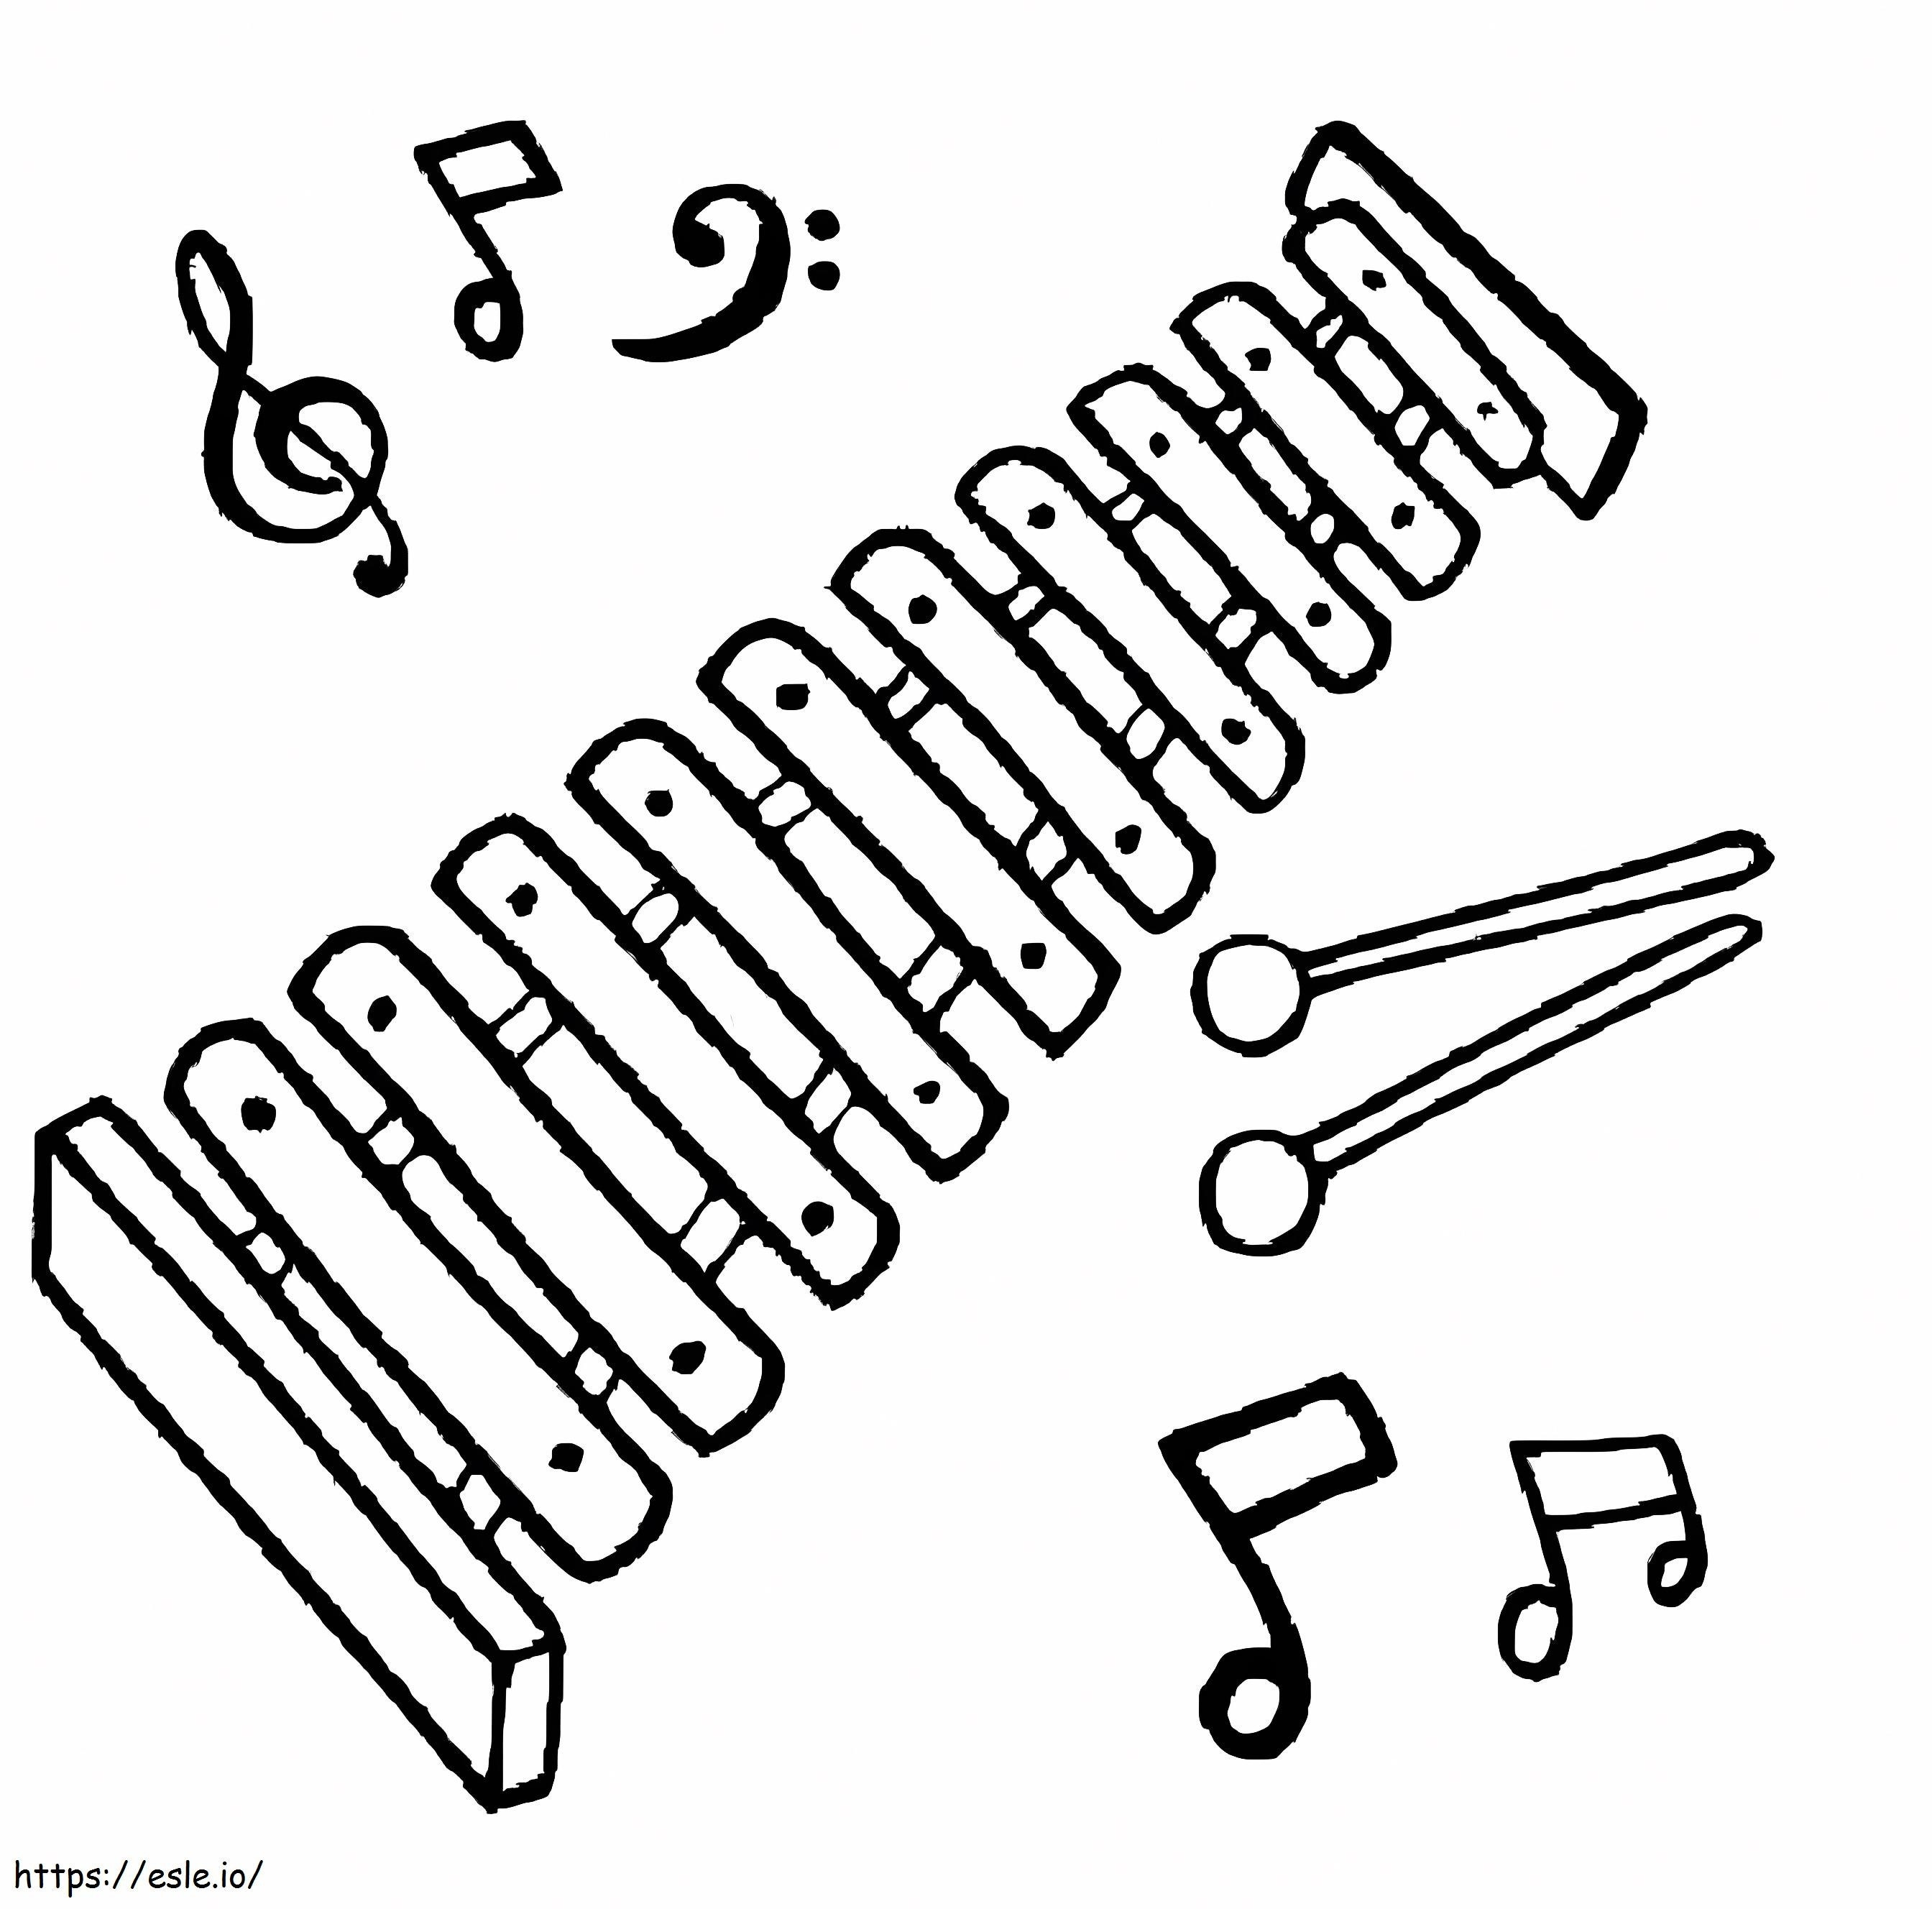 Music Xylophone coloring page